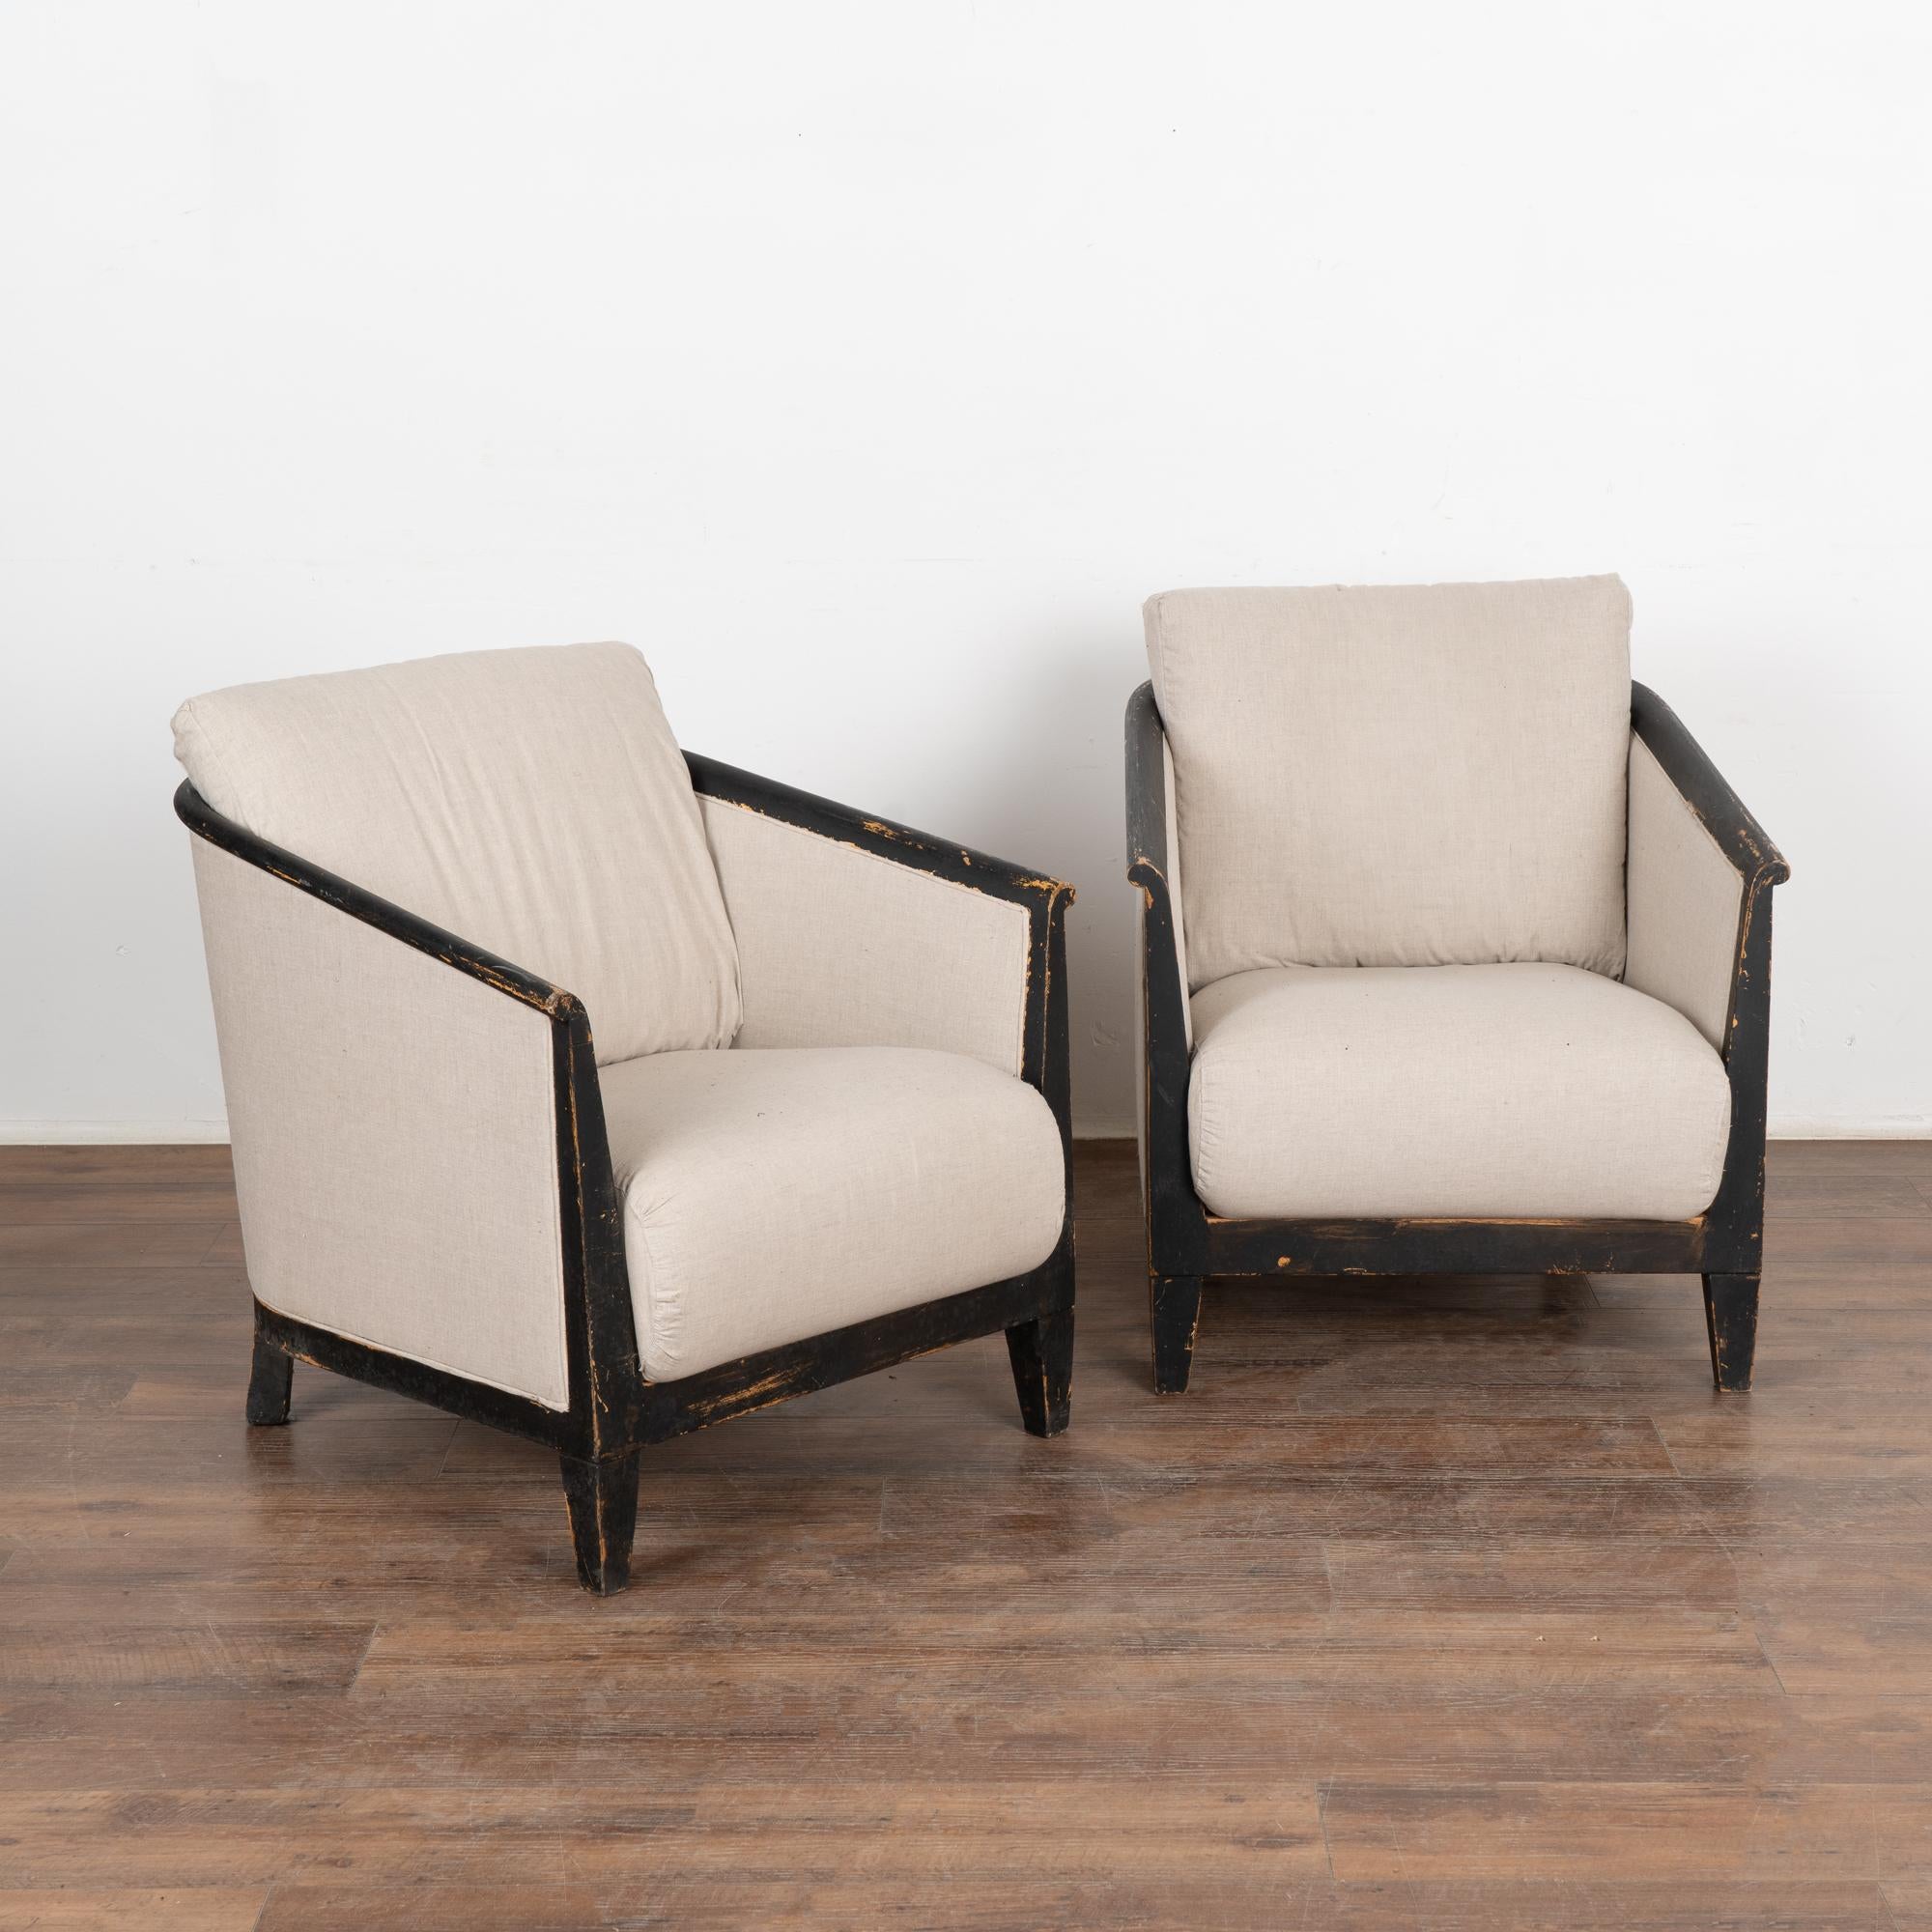 This pair of Swedish arm chairs has timeless clean lines with a squared view in front and barrel curve to the back due to the attractive 